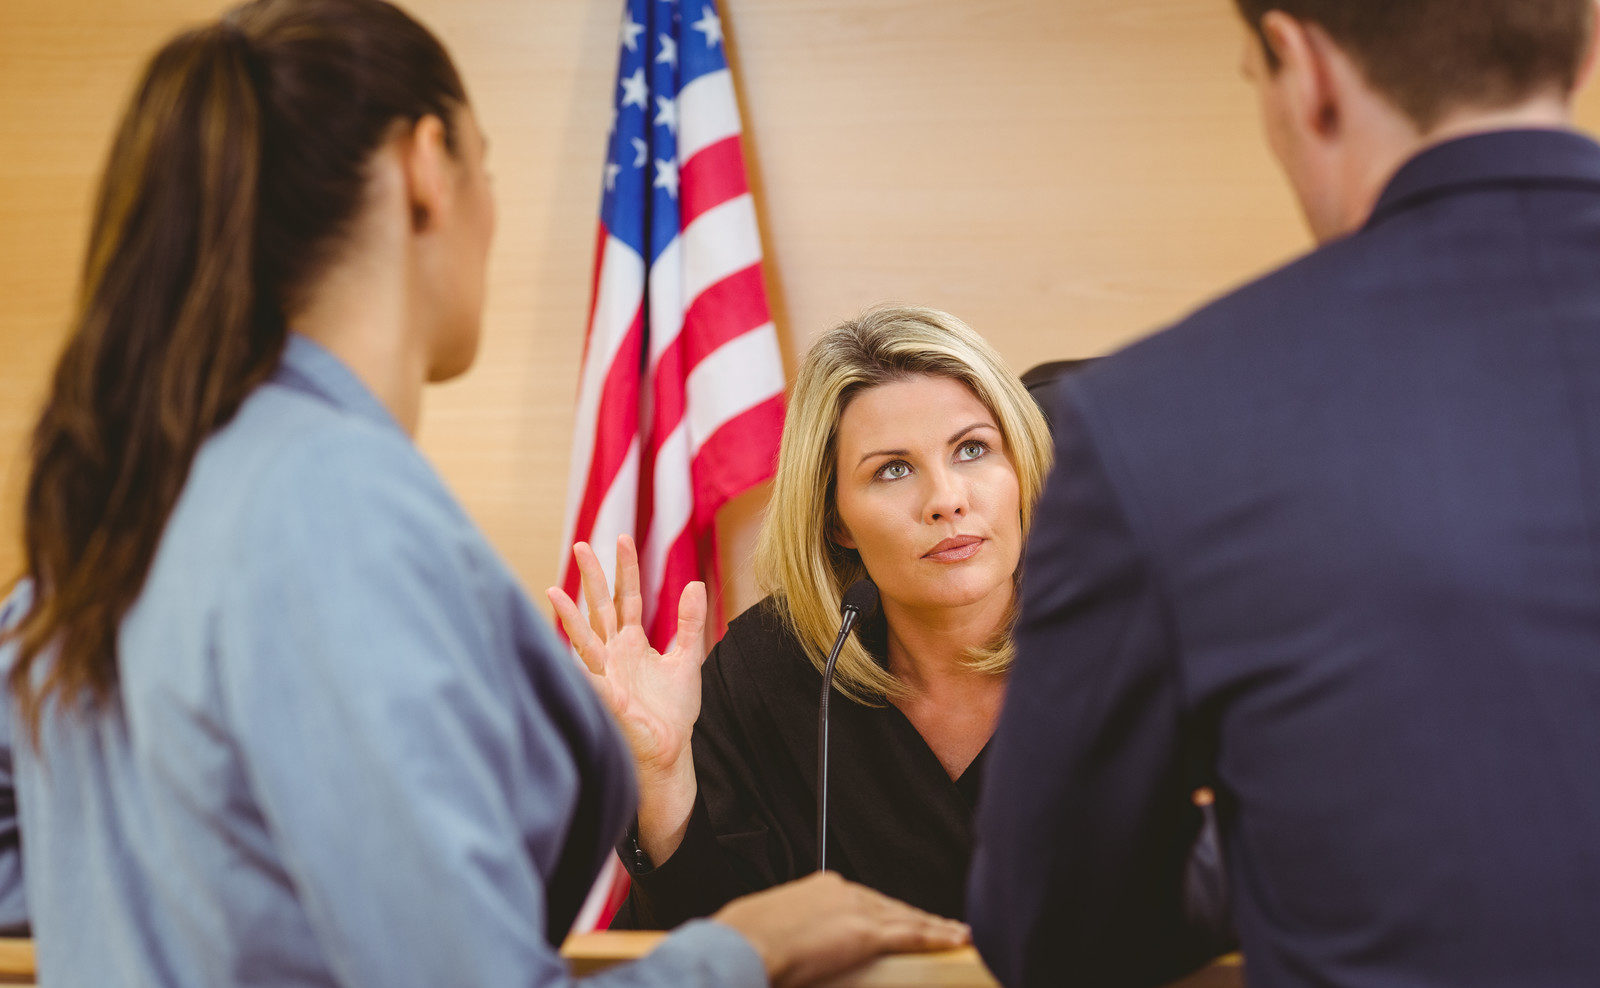 Enforcing a separation or divorce agreement may involve going to court